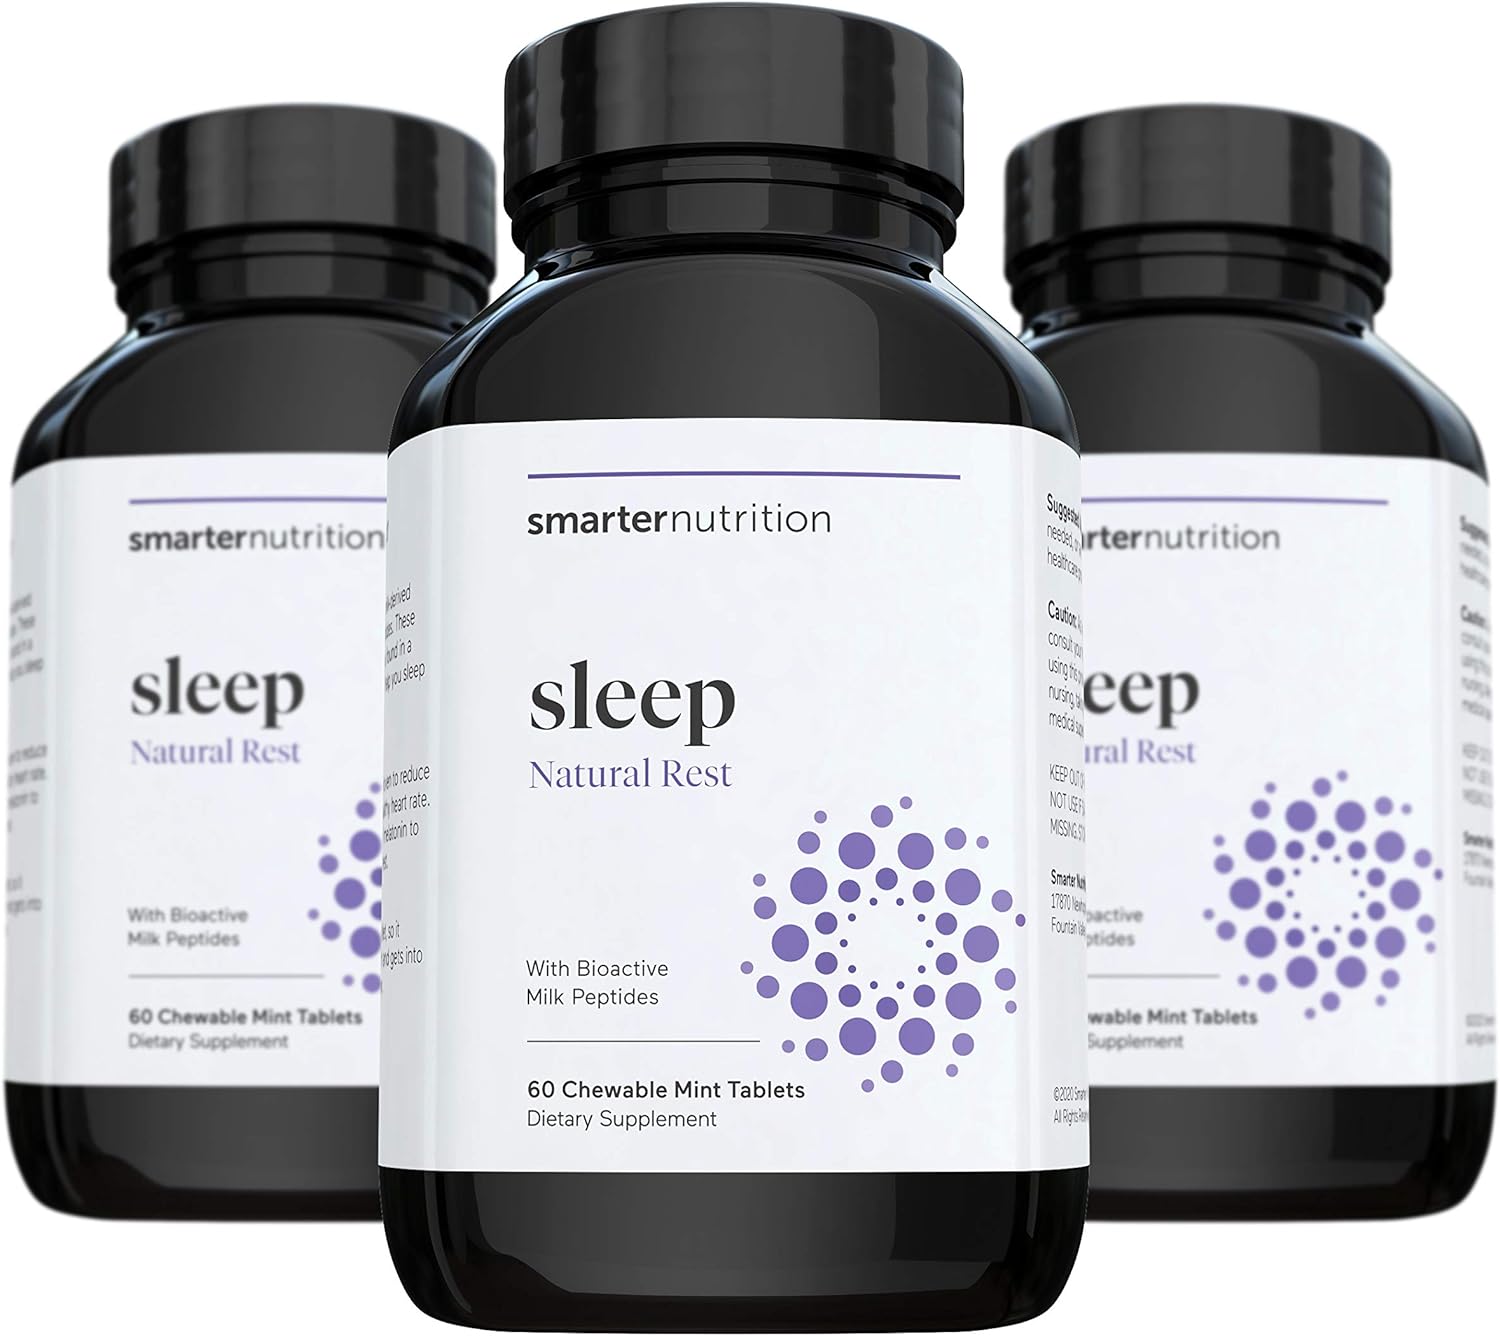 Smarter Sleep - Nighttime Sleep Aid with Bioactive Milk Peptides & Melatonin, a Naturally Produced Compound to Encourage Restorative Sleep for Energy, Mental Clarity, Stress Support (90 Servings)